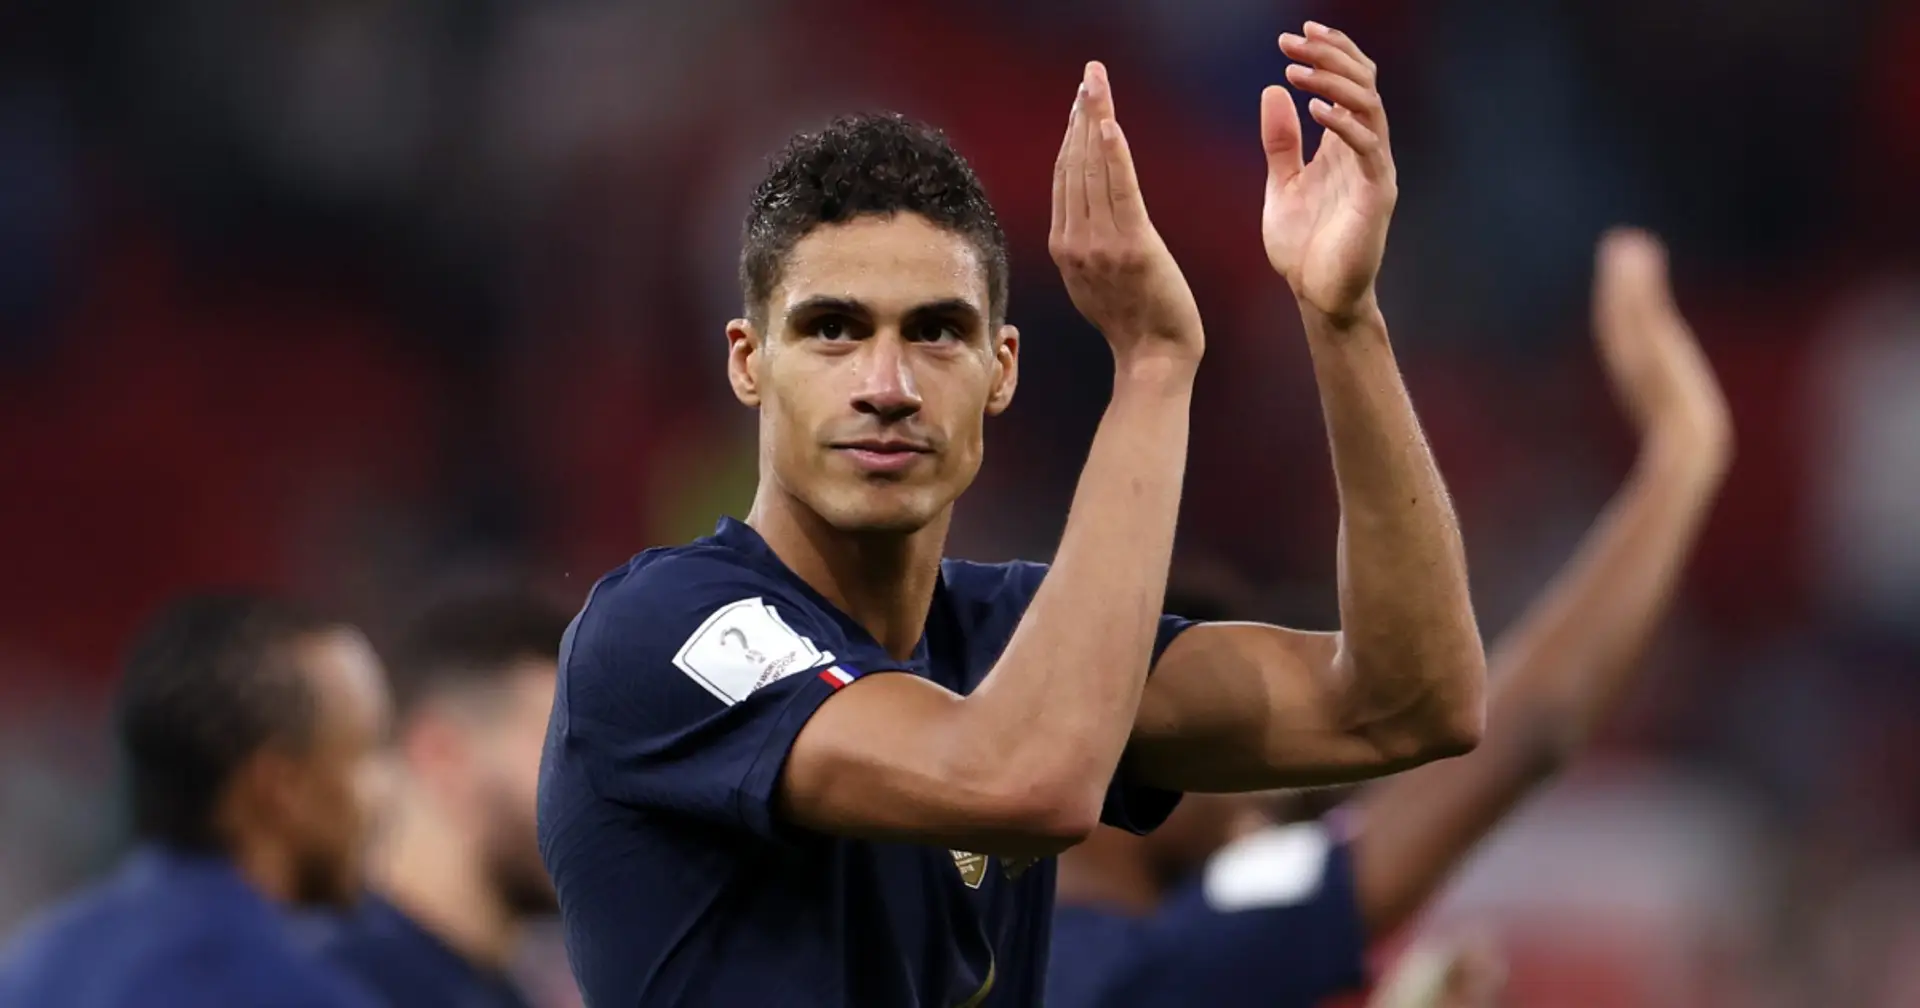 'Rolls-Royce of a defender': Man United fans react to Raphael Varane's World Cup displays ahead of England clash